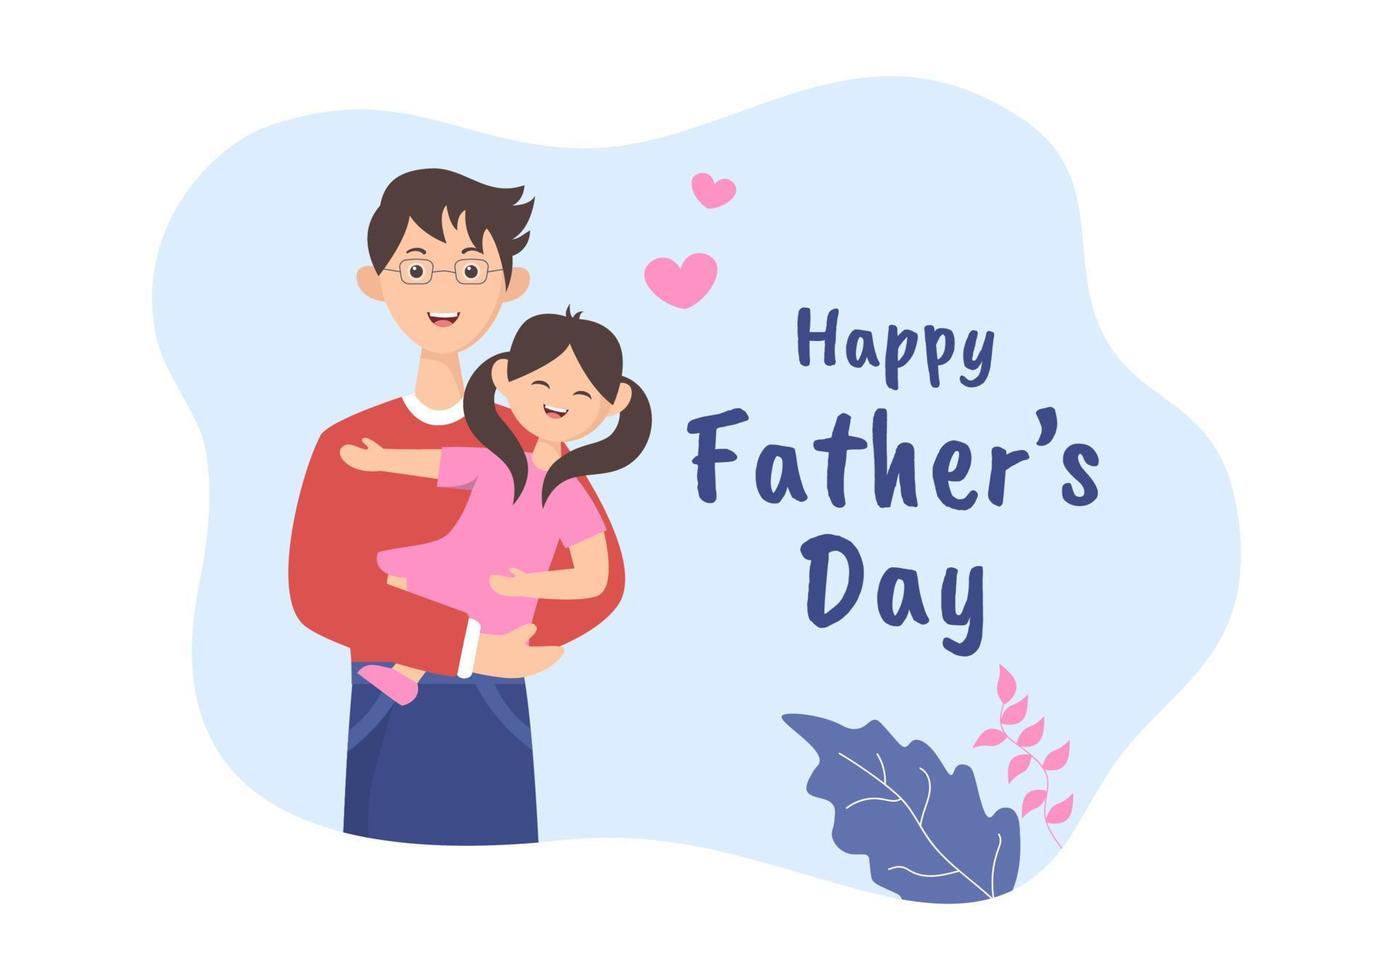 Happy Fathers Day Cartoon Illustration with Picture of Father and Son in Flat Style Design for Poster or Greeting Card vector